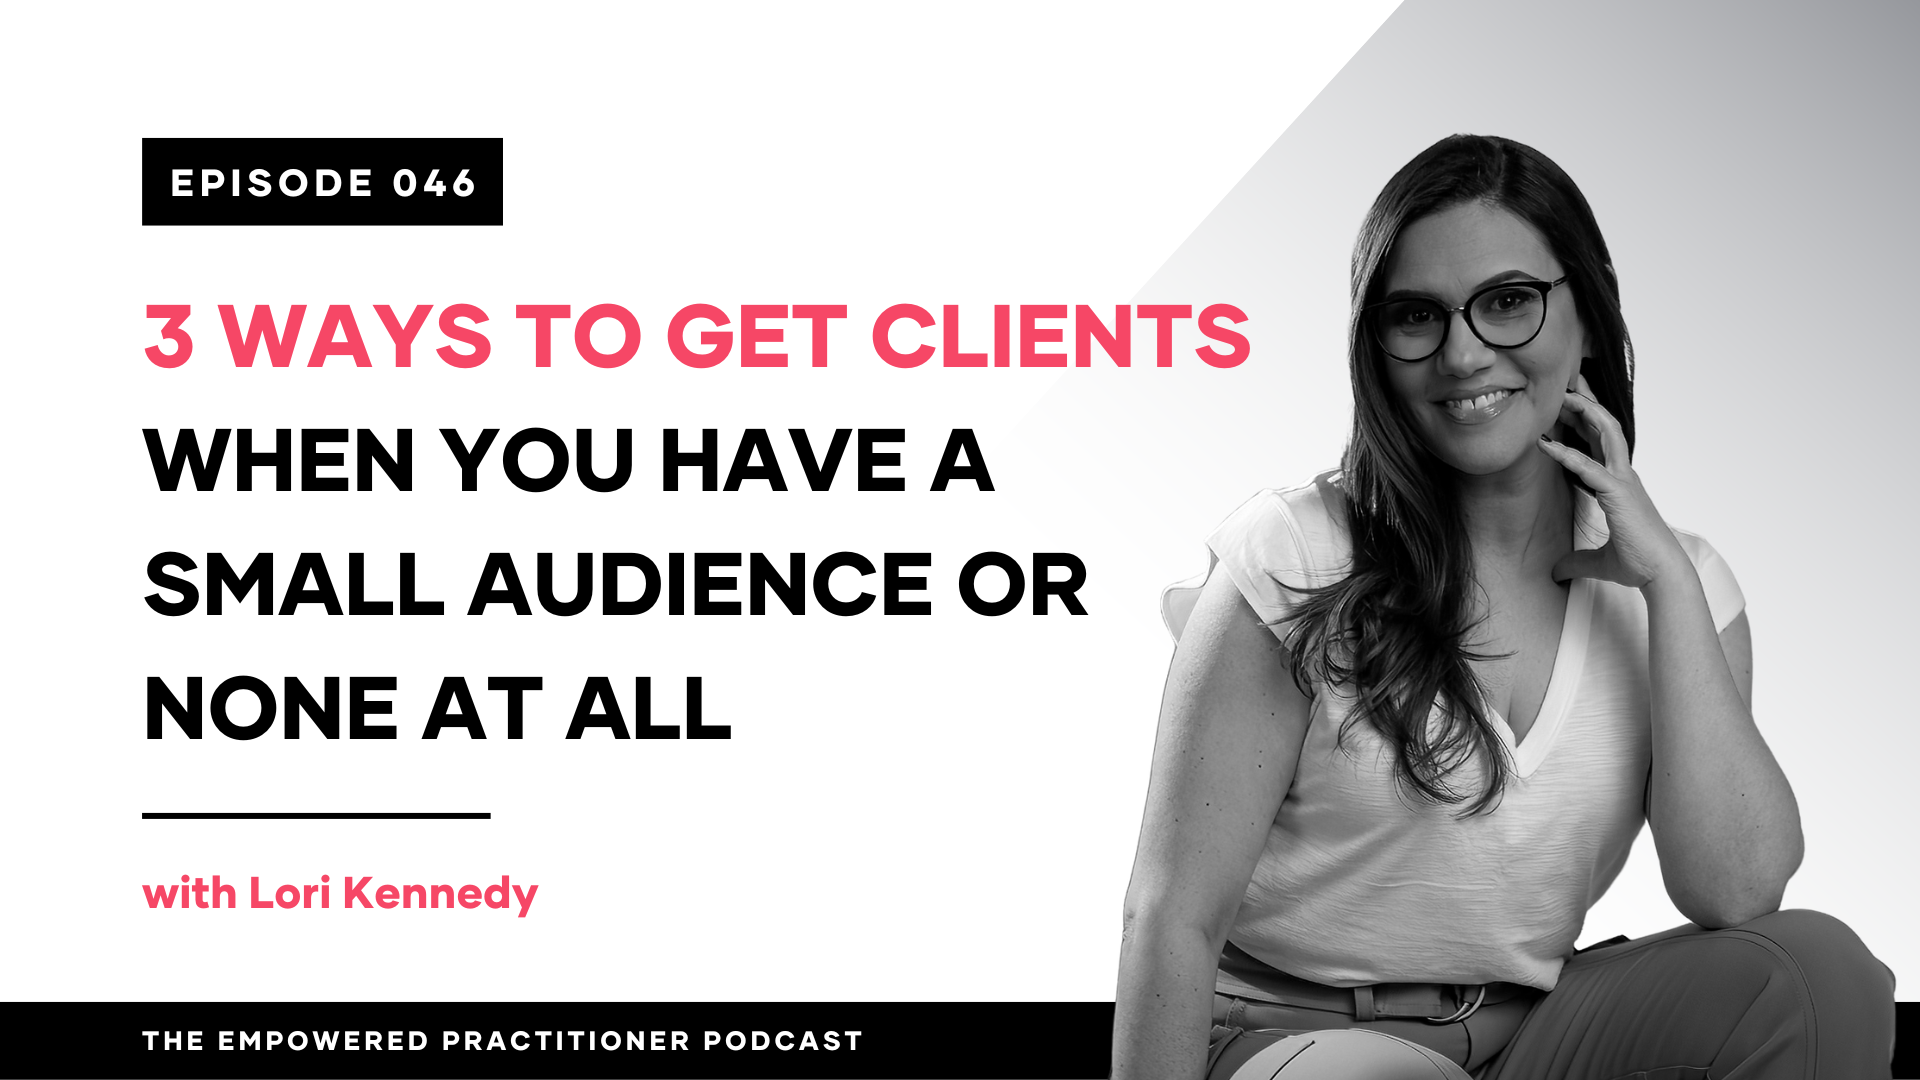 3 Ways to Get Clients When You Have A Small Audience Or None At All